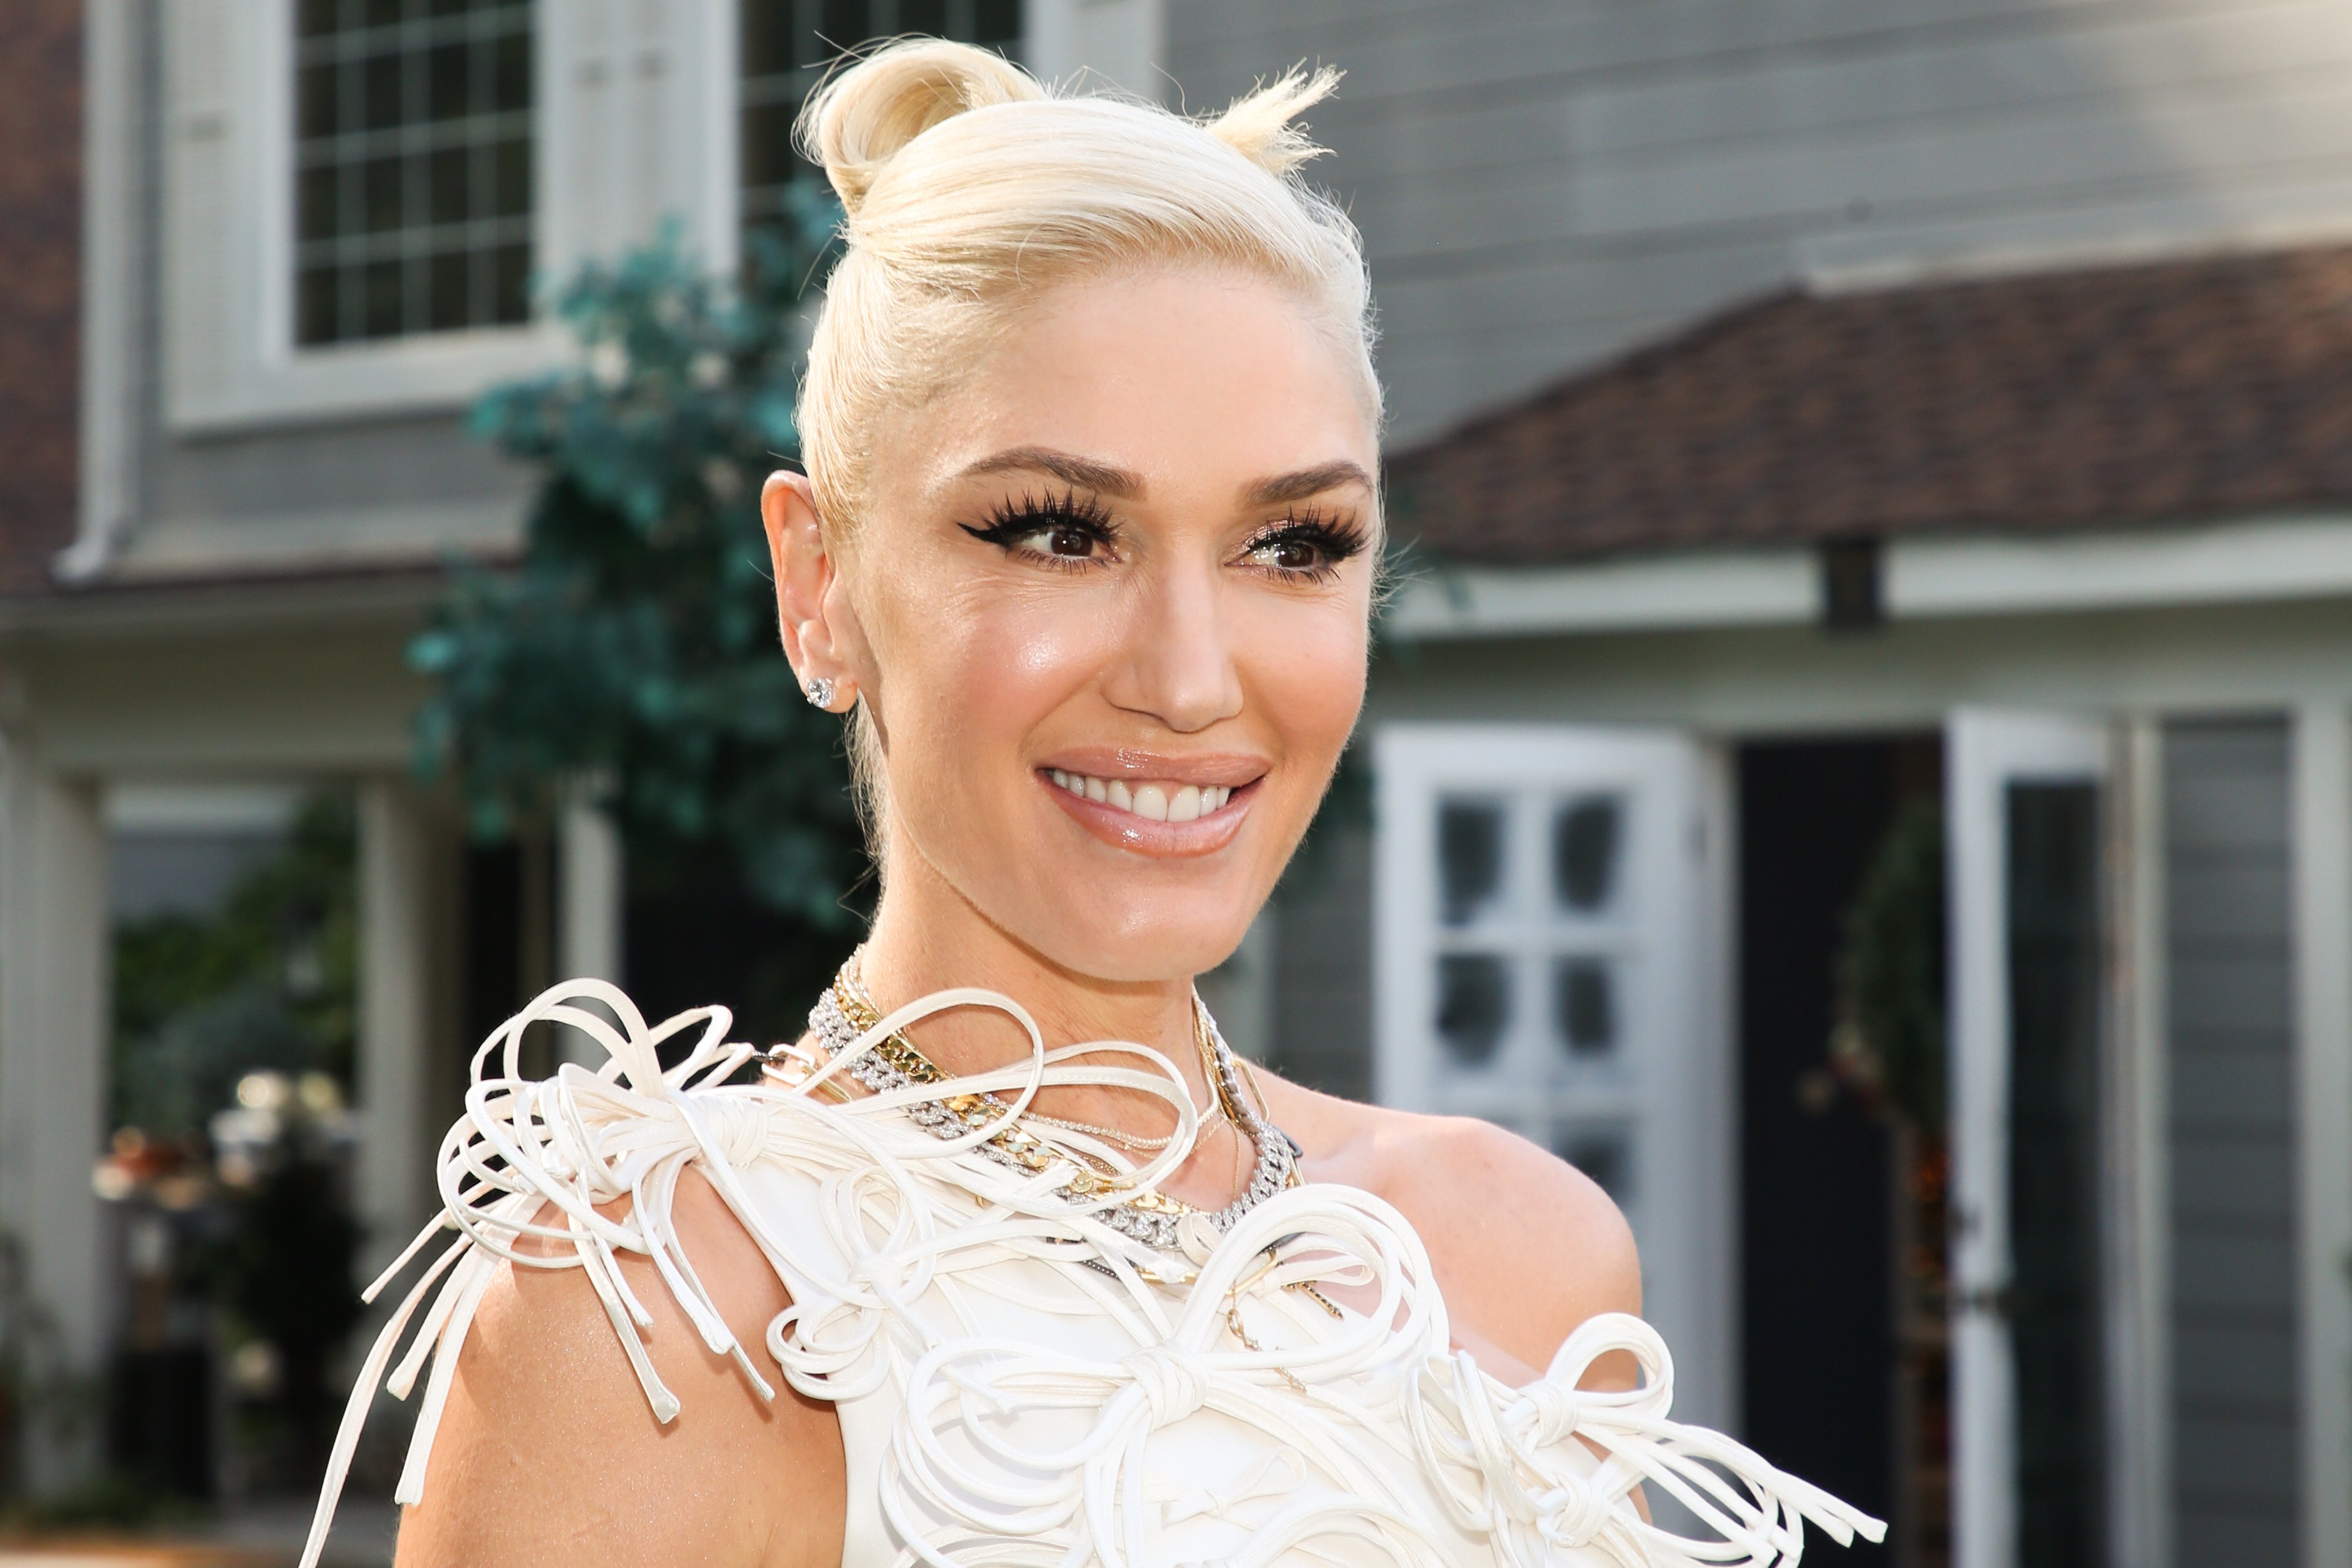 Gwen Stefani visits Hallmark Channel's "Home & Family" on December 02, 2020 | Photo: Getty Images.